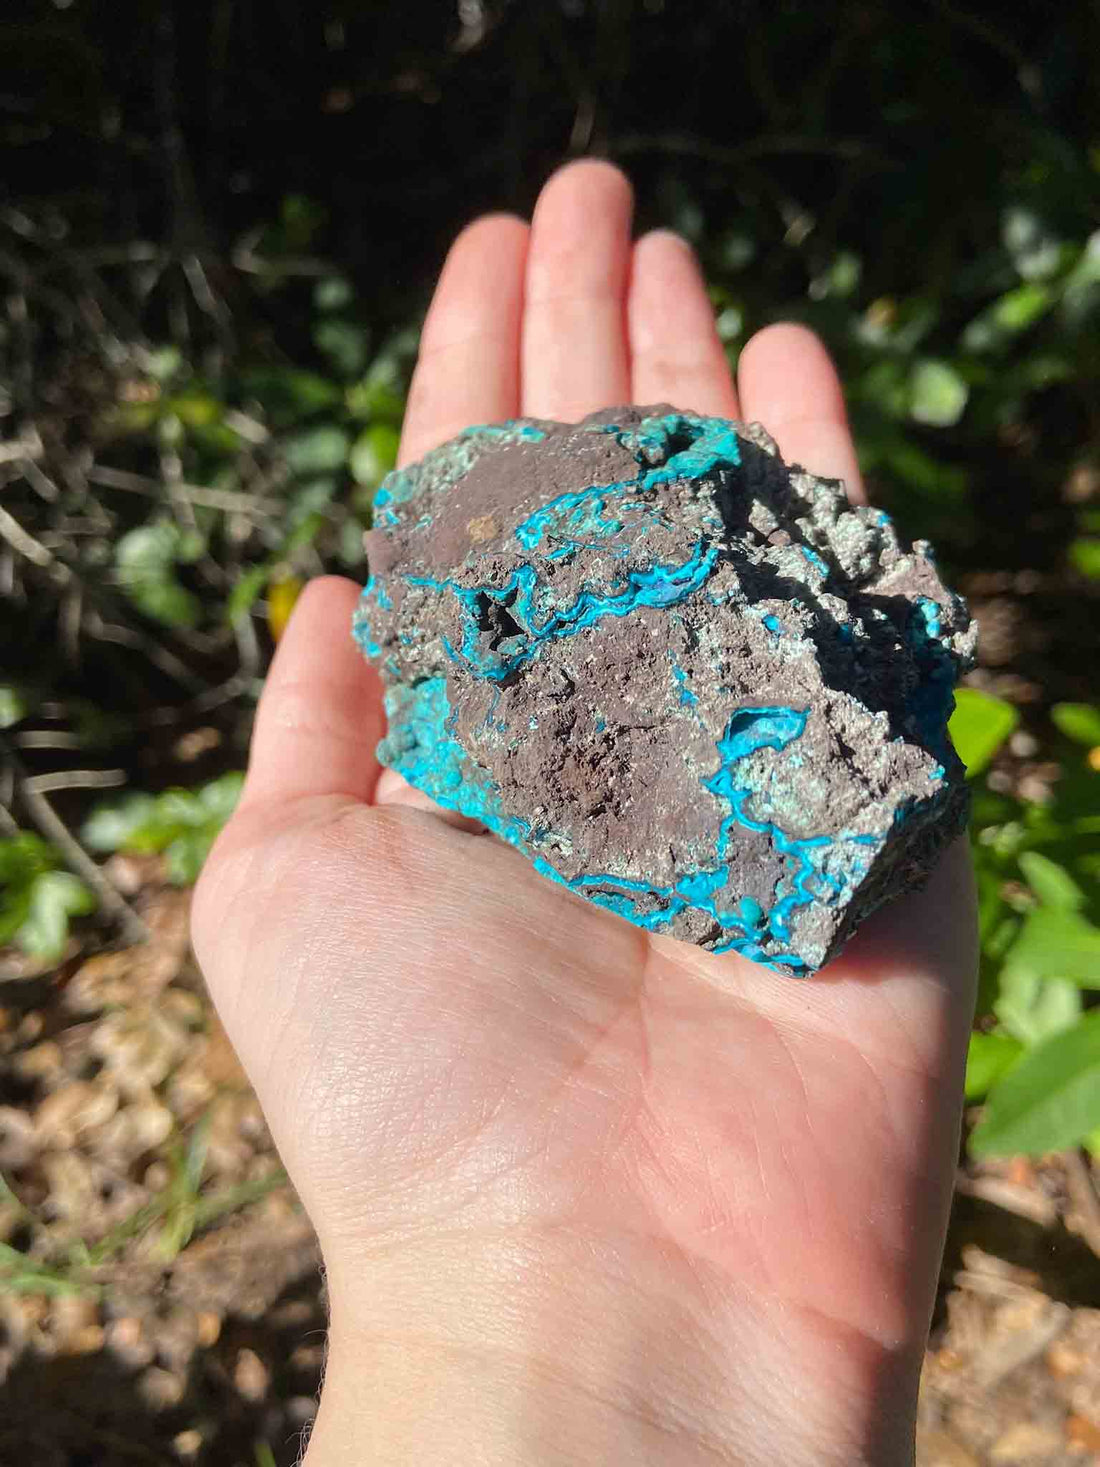 Large Chrysocolla Natural Gemstone Cluster - Exceptional Quality - Unique!